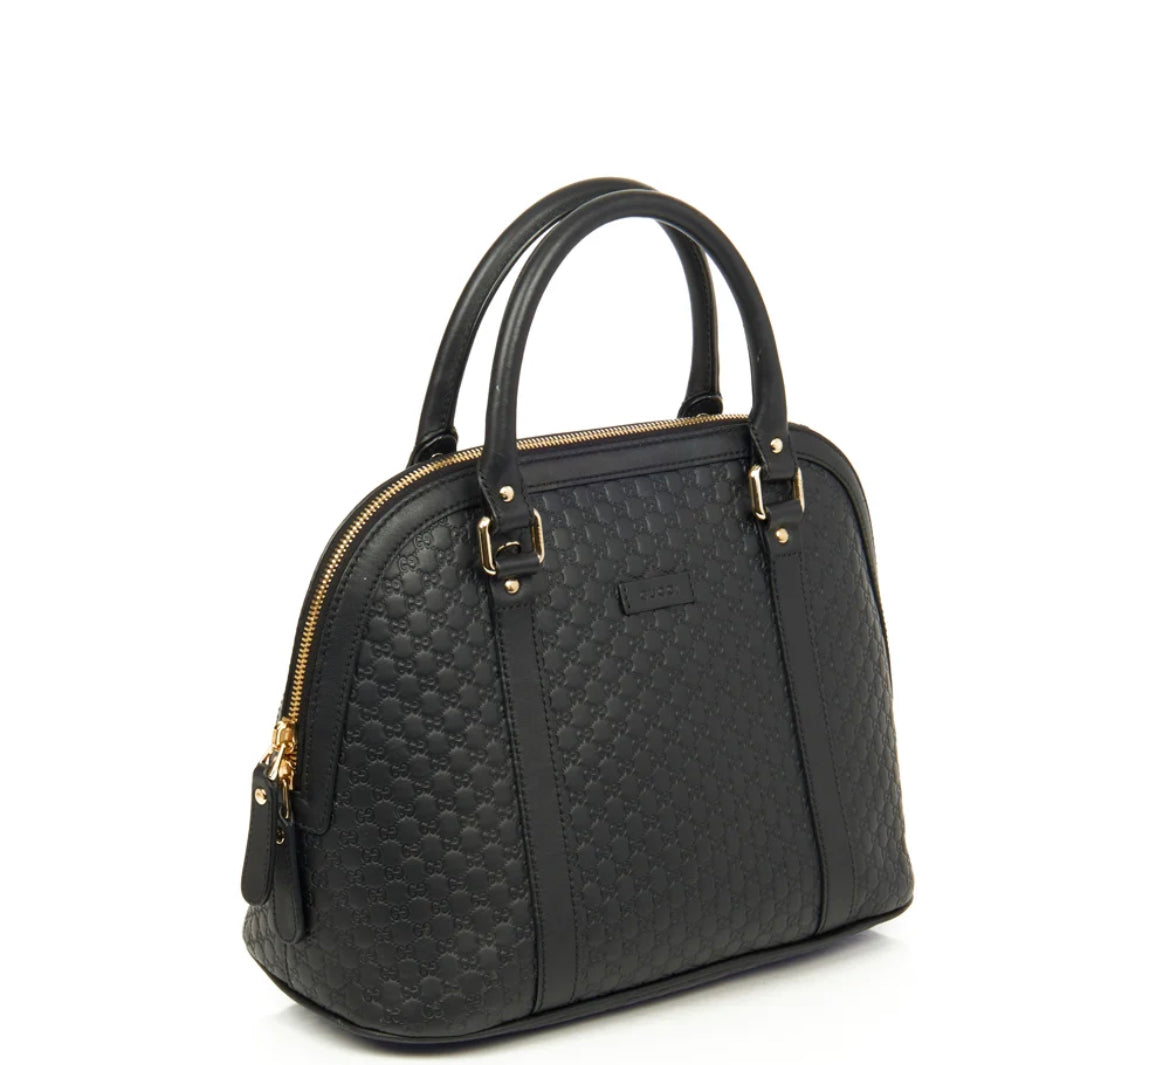 WOMENS GUCCI GG EMBOSSED GUCCISSIMA LEATHER BAG - BLACK